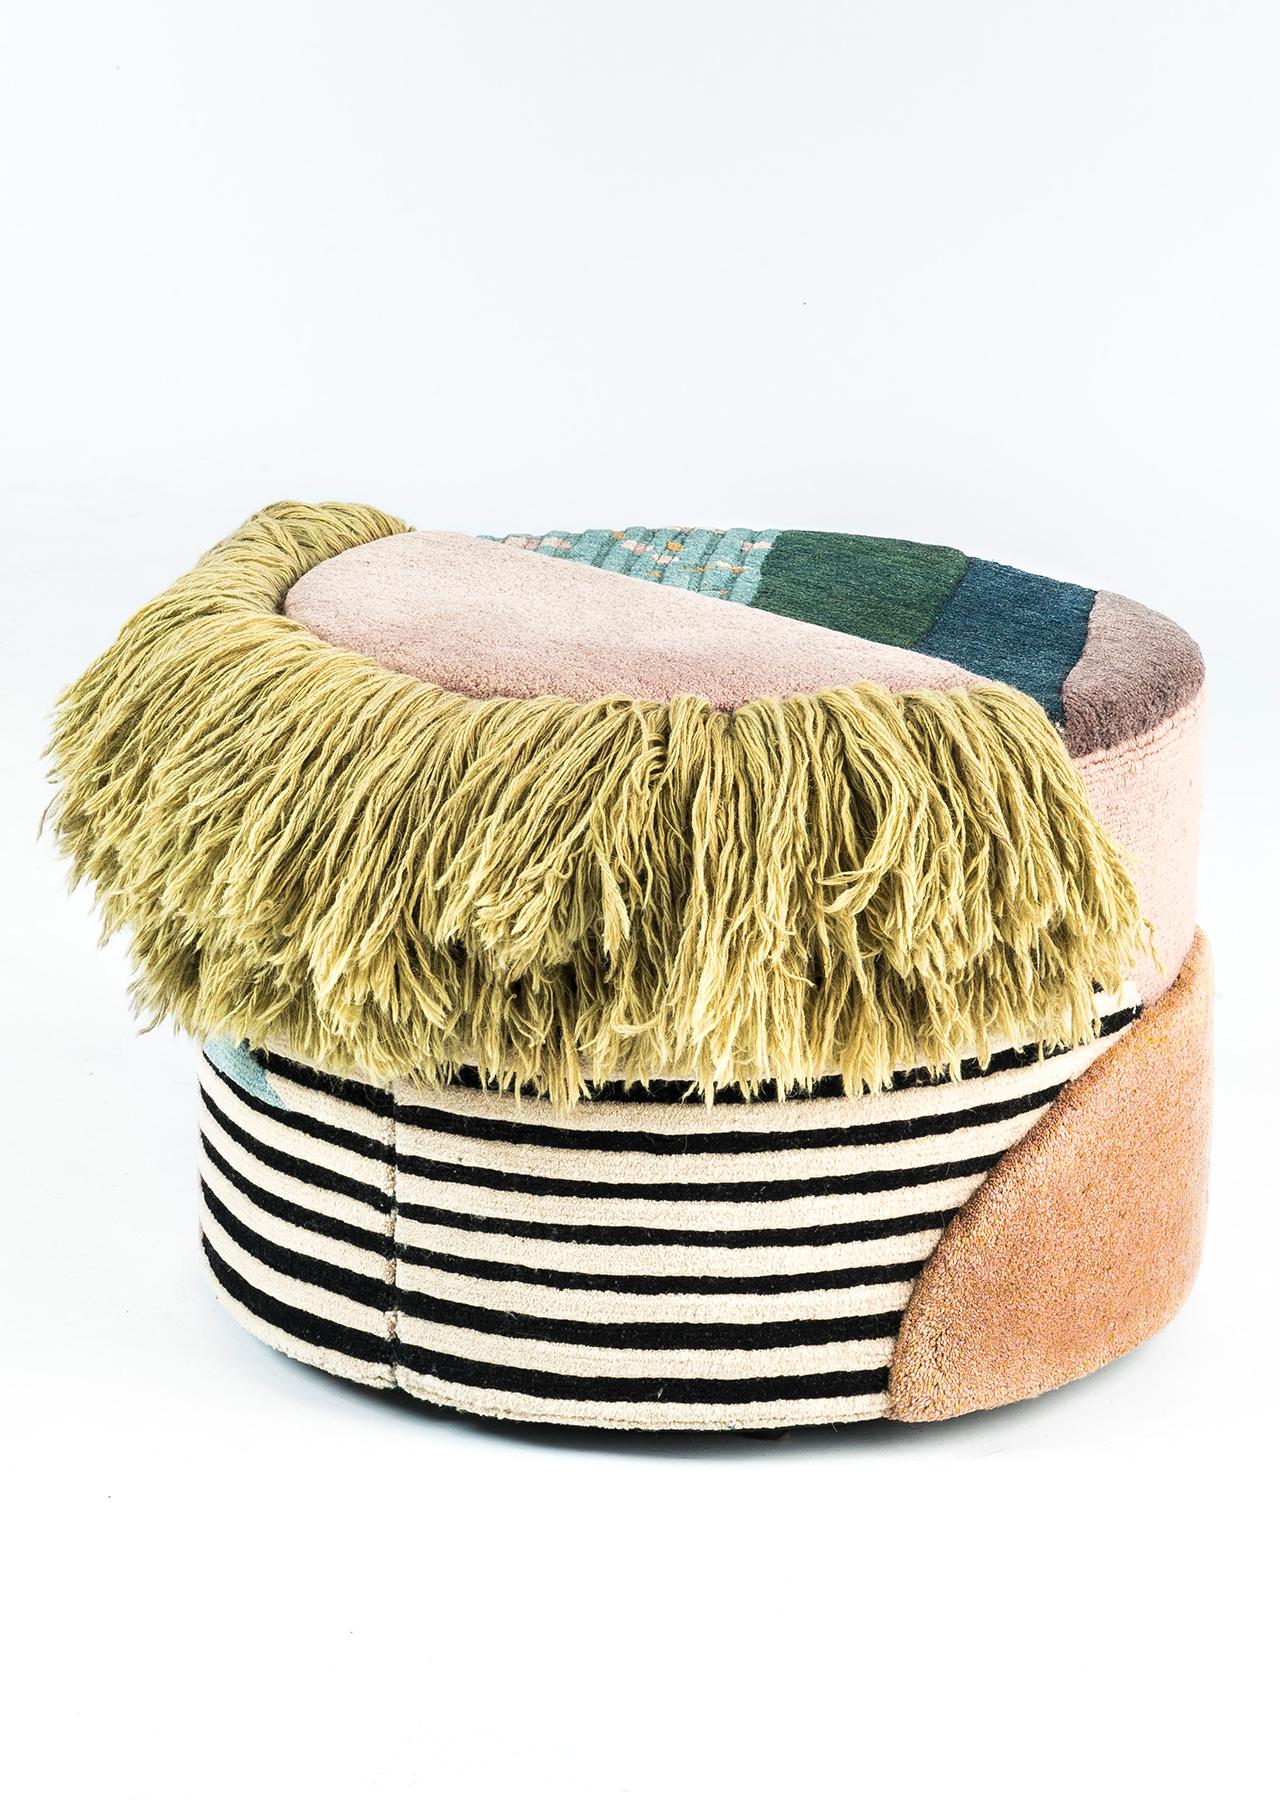 Contemporary Pouf Charaktere Colette by Lyk Carpet For Sale